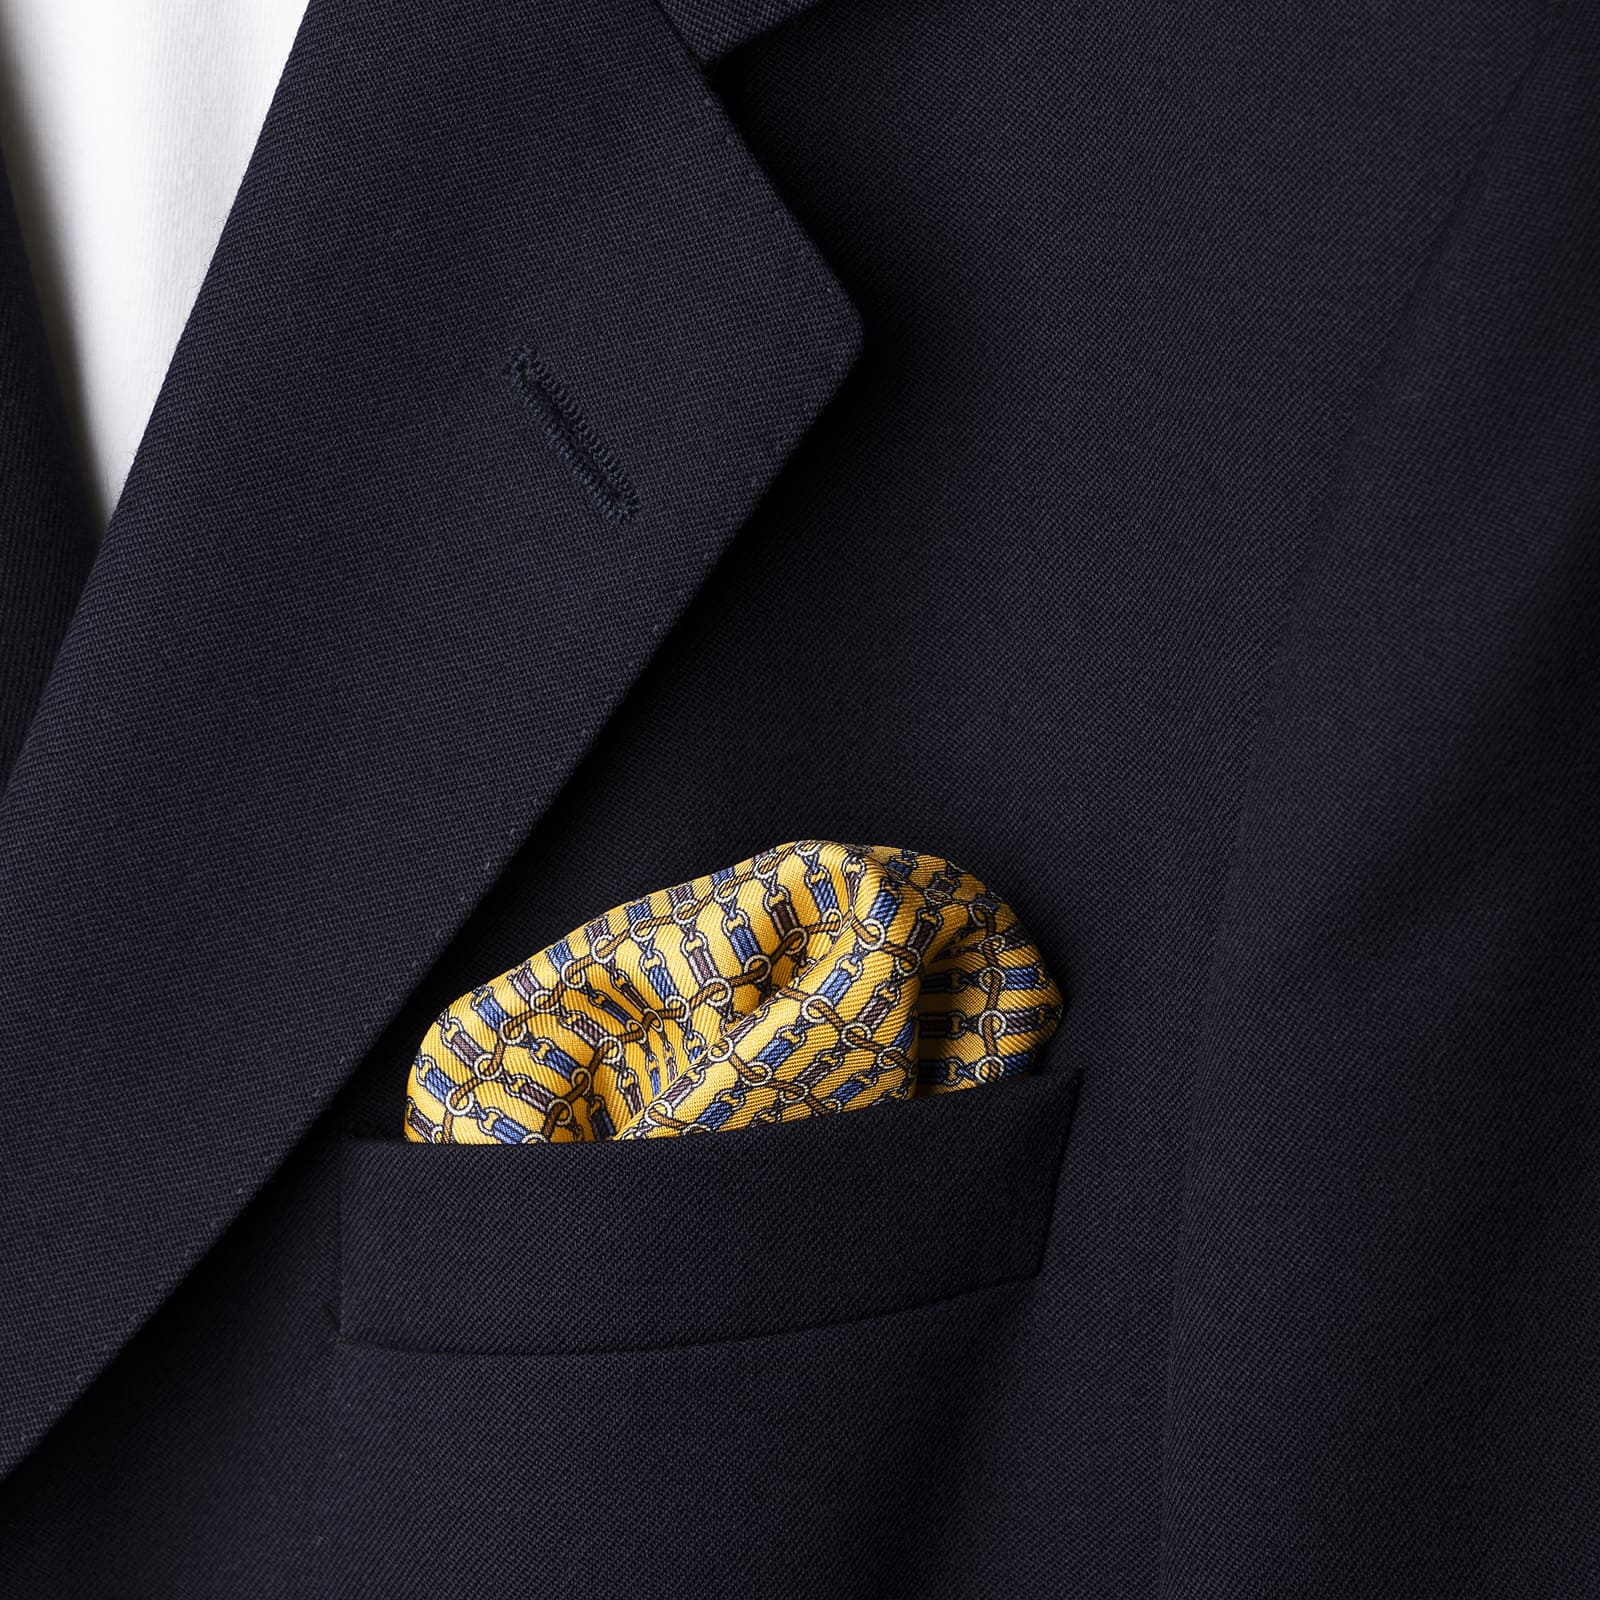 Pocket square yellow with blue details